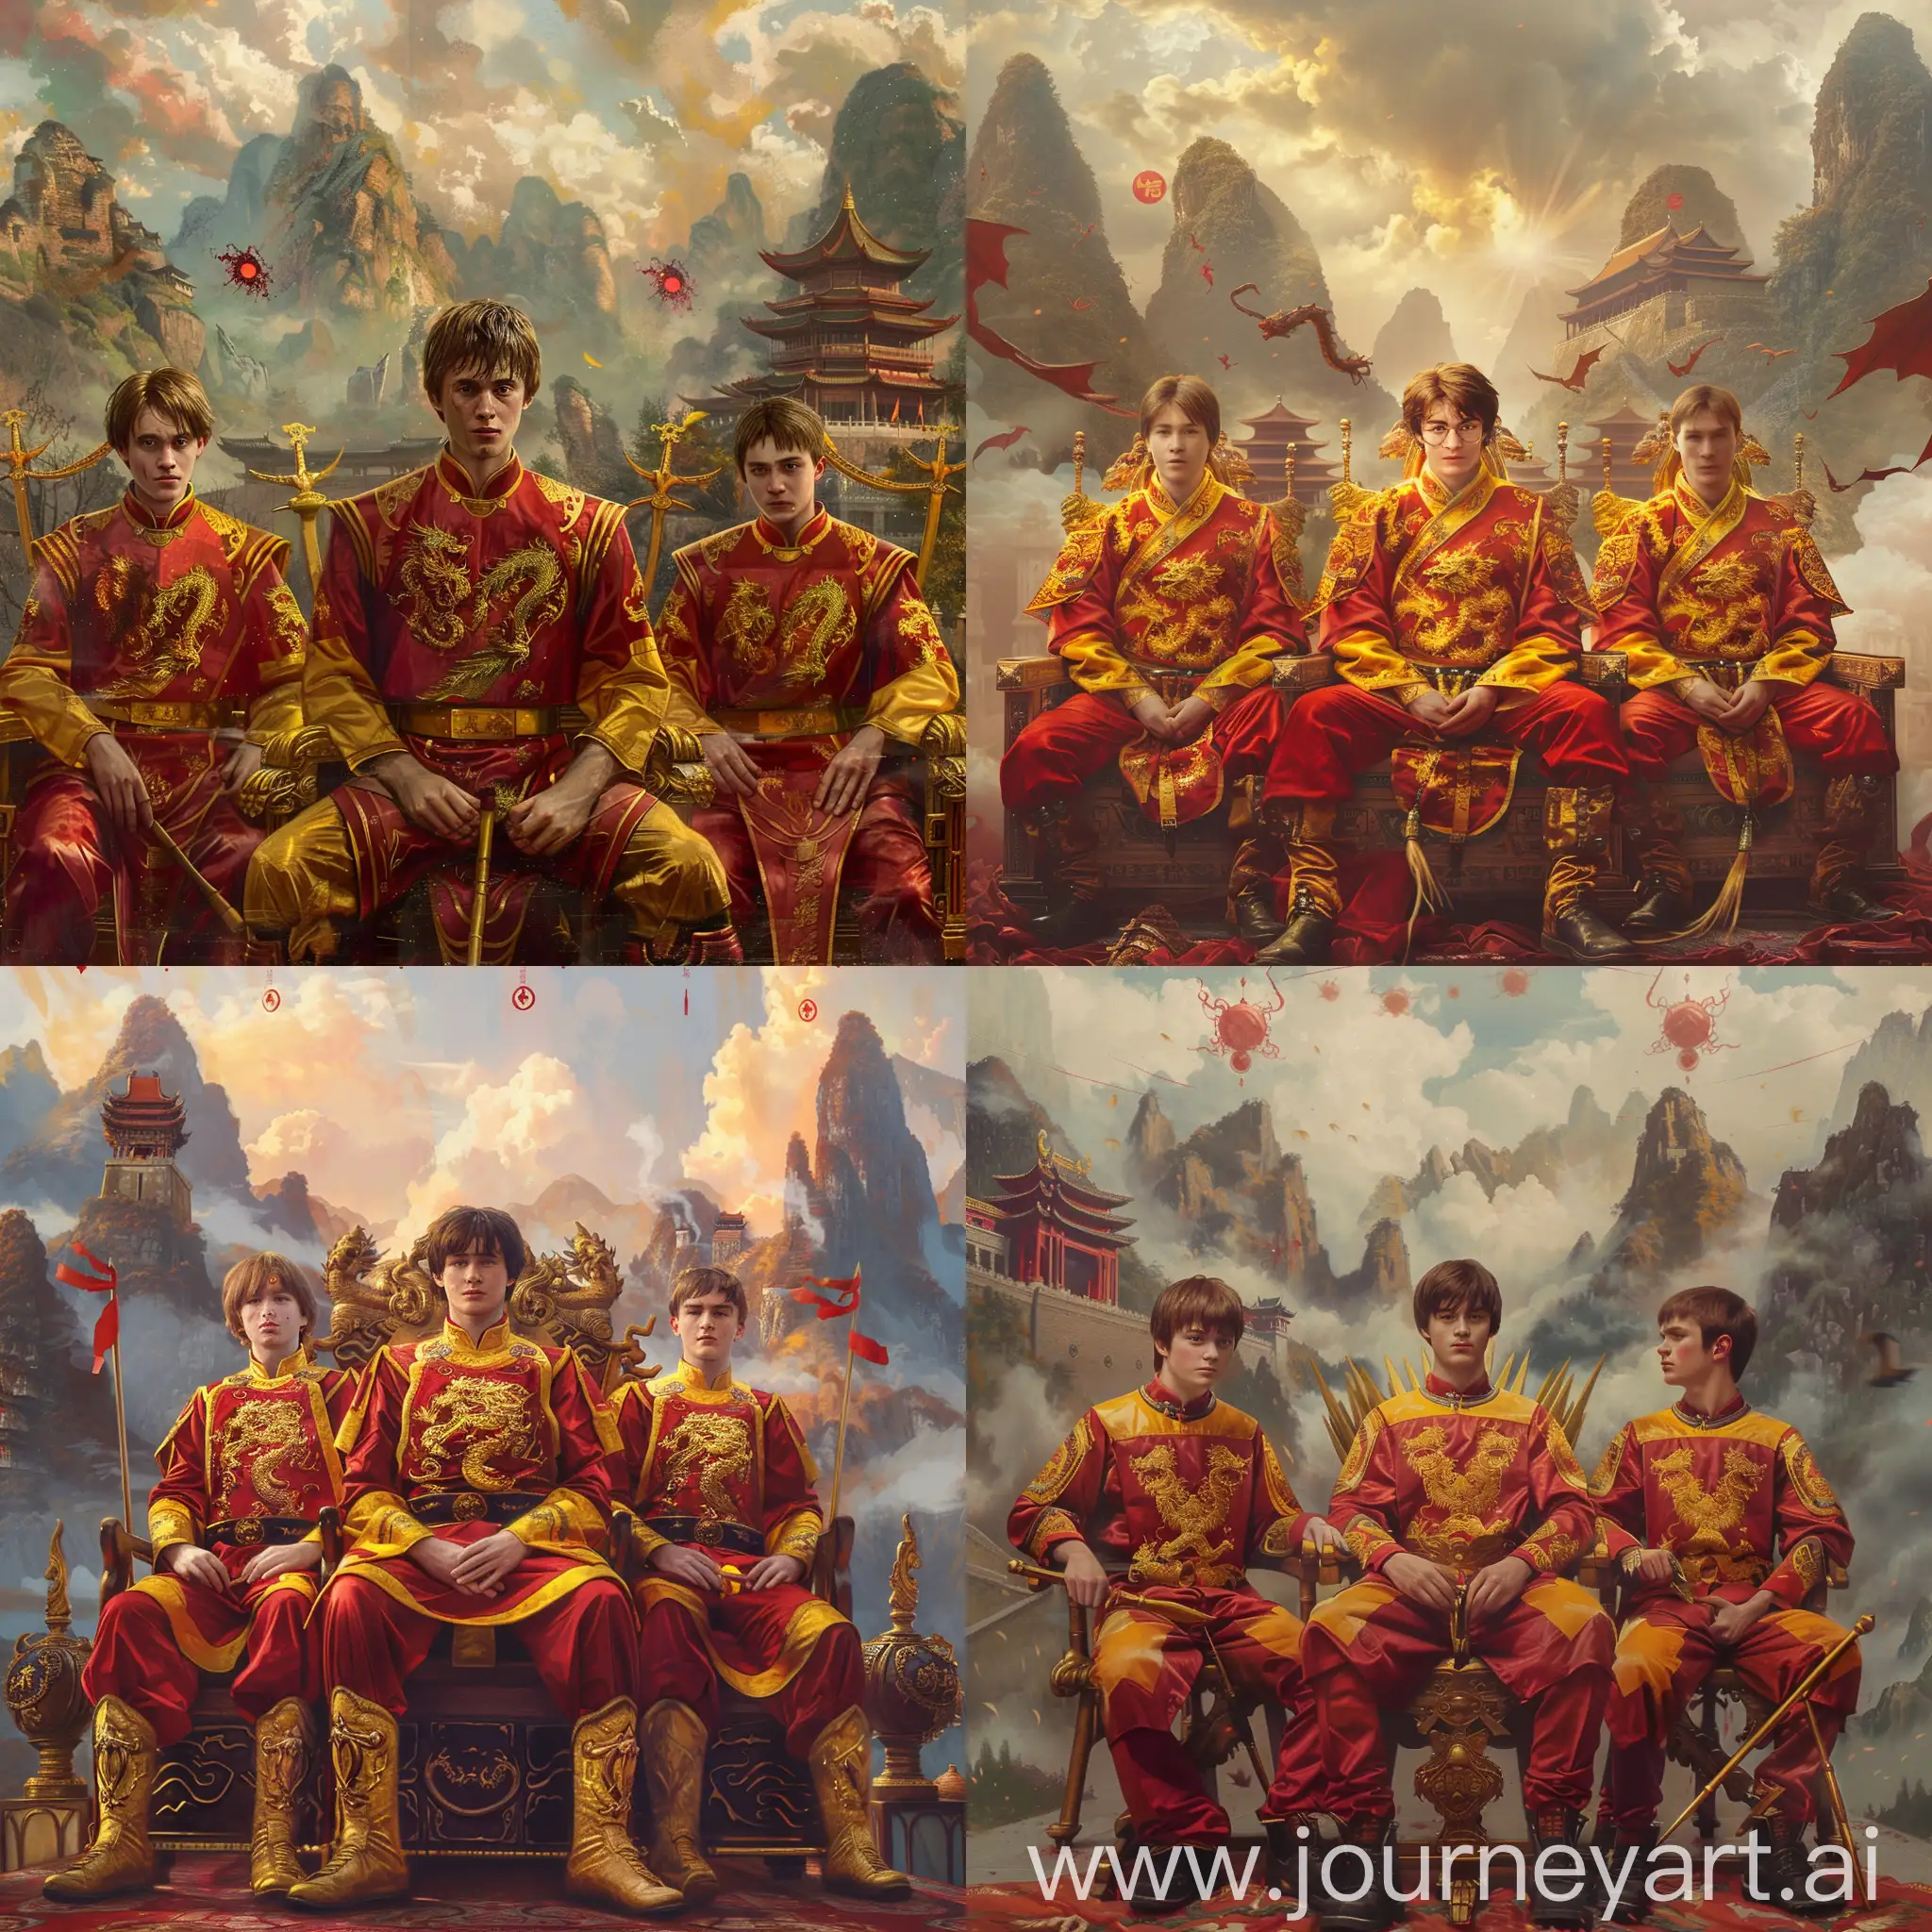 Harry-Potter-Cedric-Diggory-and-Ron-Weasley-in-Chinese-Medieval-Armor-on-Golden-Thrones